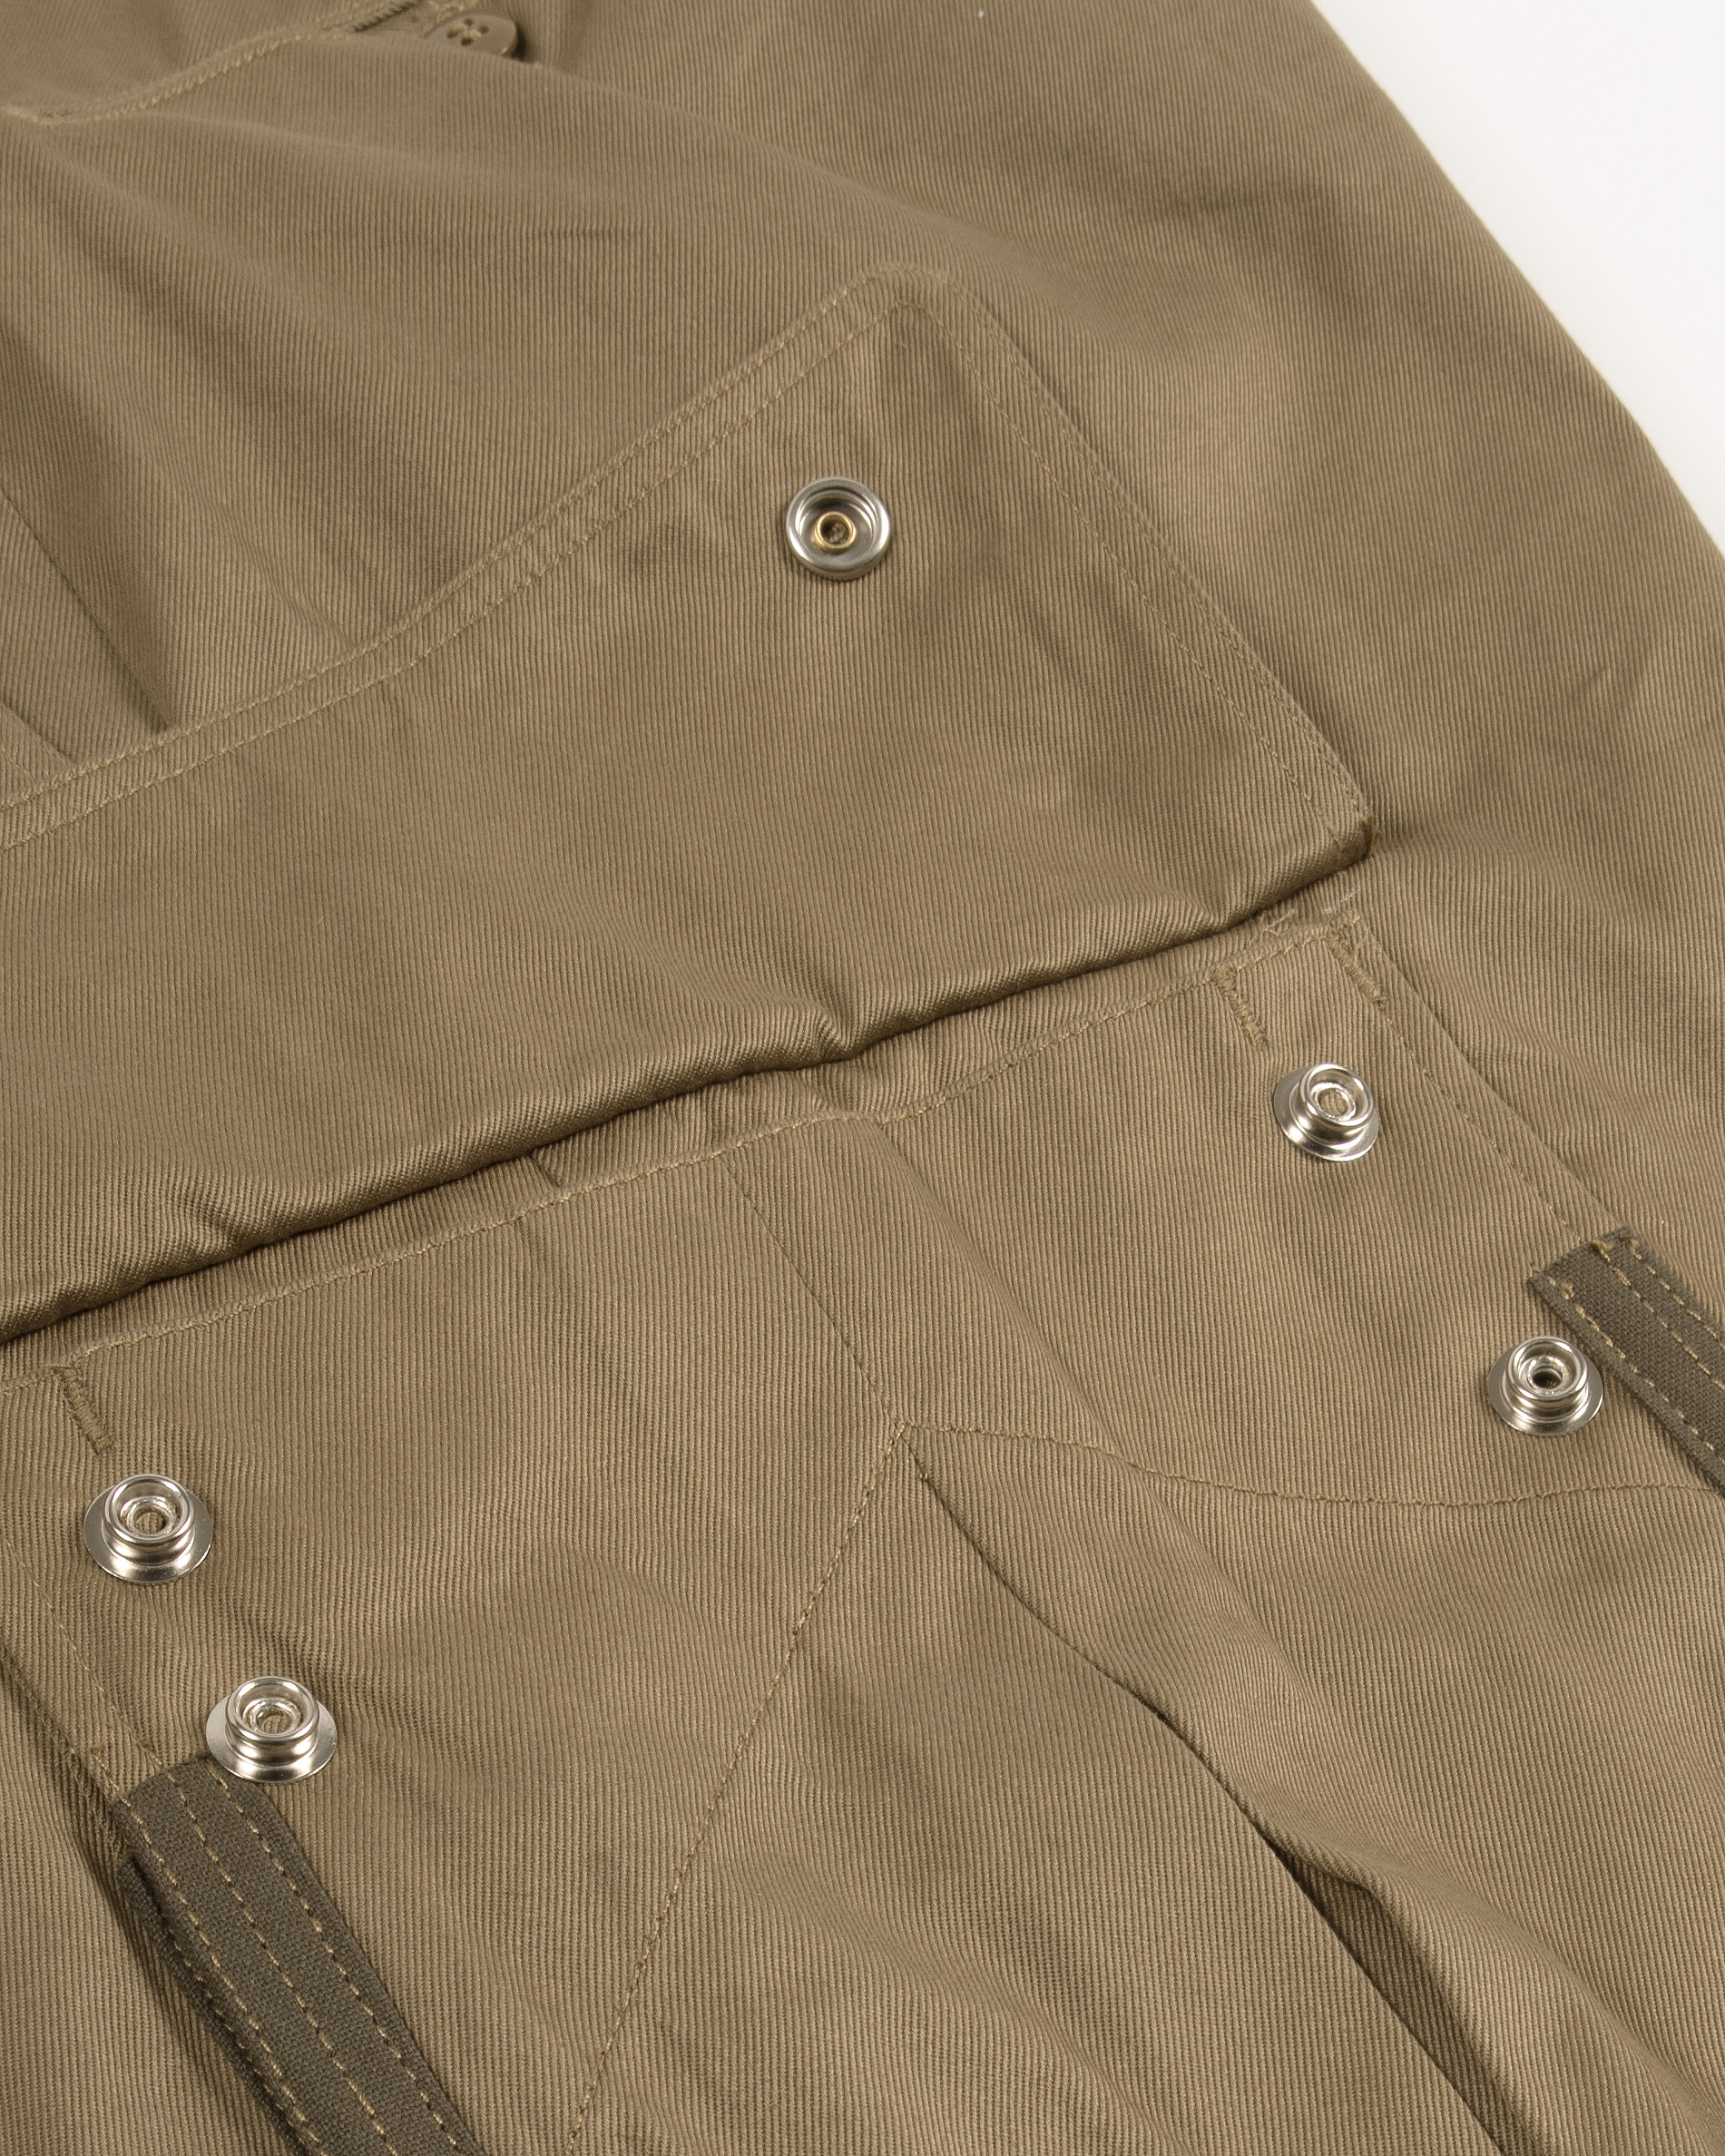 WWII US Paratrooper Reinforced Jump Trousers